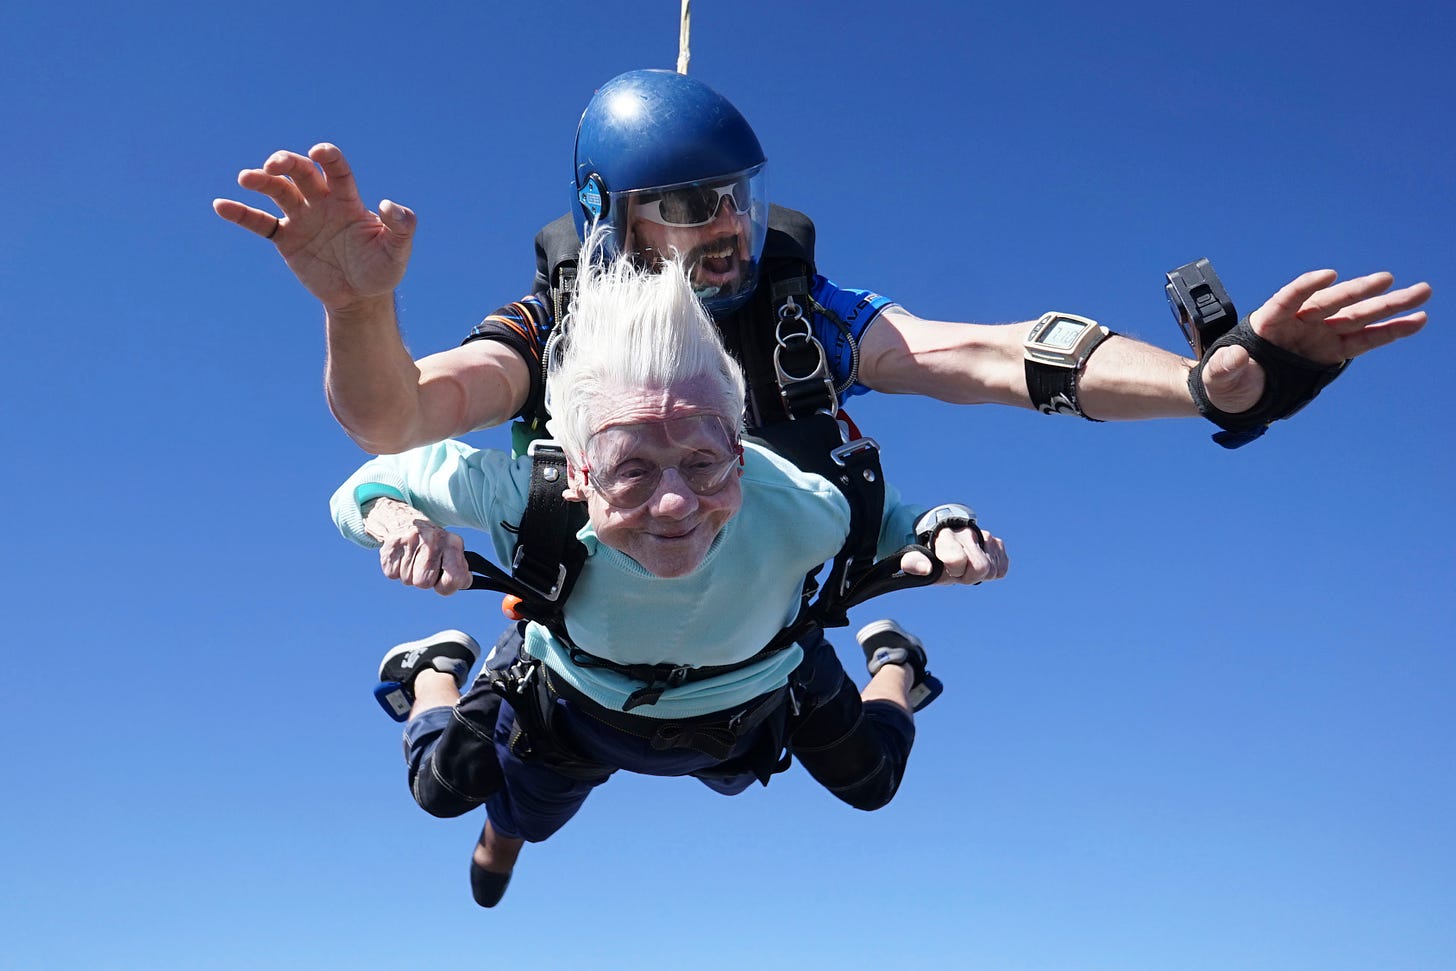 Dorothy Hoffner, 104, falls through the air with tandem jumper Derek Baxter as she becomes the oldest person in the world to skydive.